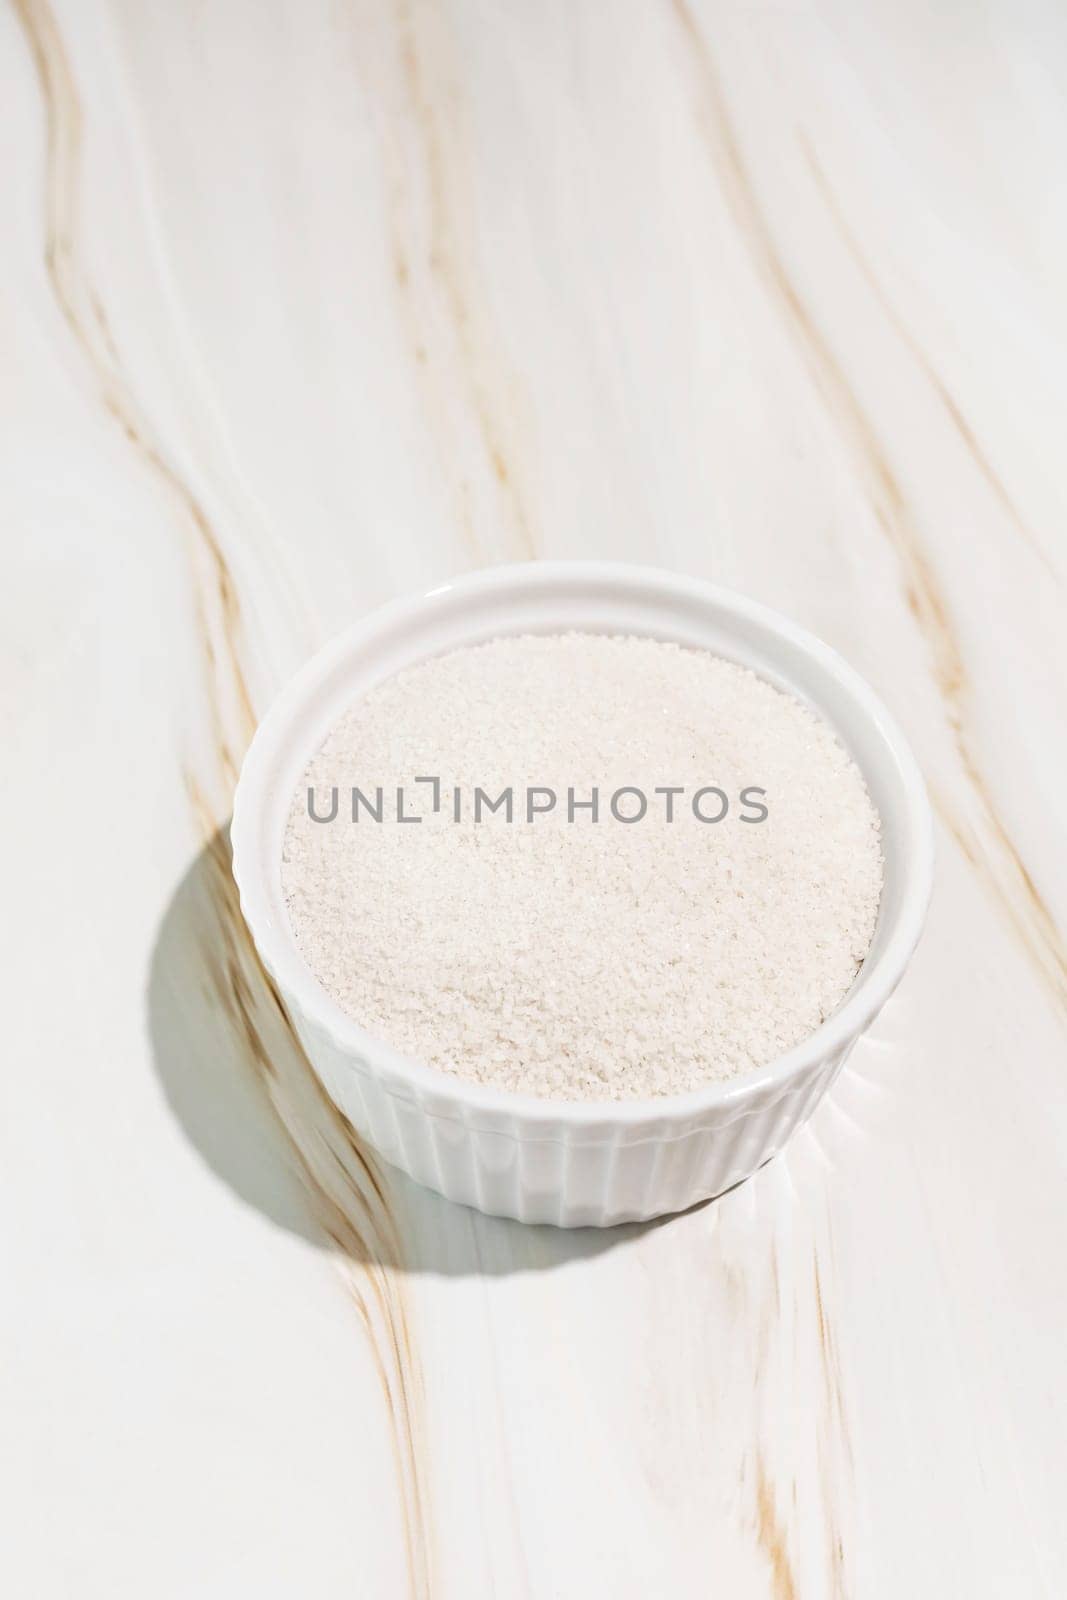 Celtic Gray Sea Salt In A White Ceramic Bowl On Granite Table, Copy Space. Vertical Plane. Natural And Unrefined Salt Harvested From Brittany, France. Natural Minerals And Trace Elements, Superfood.